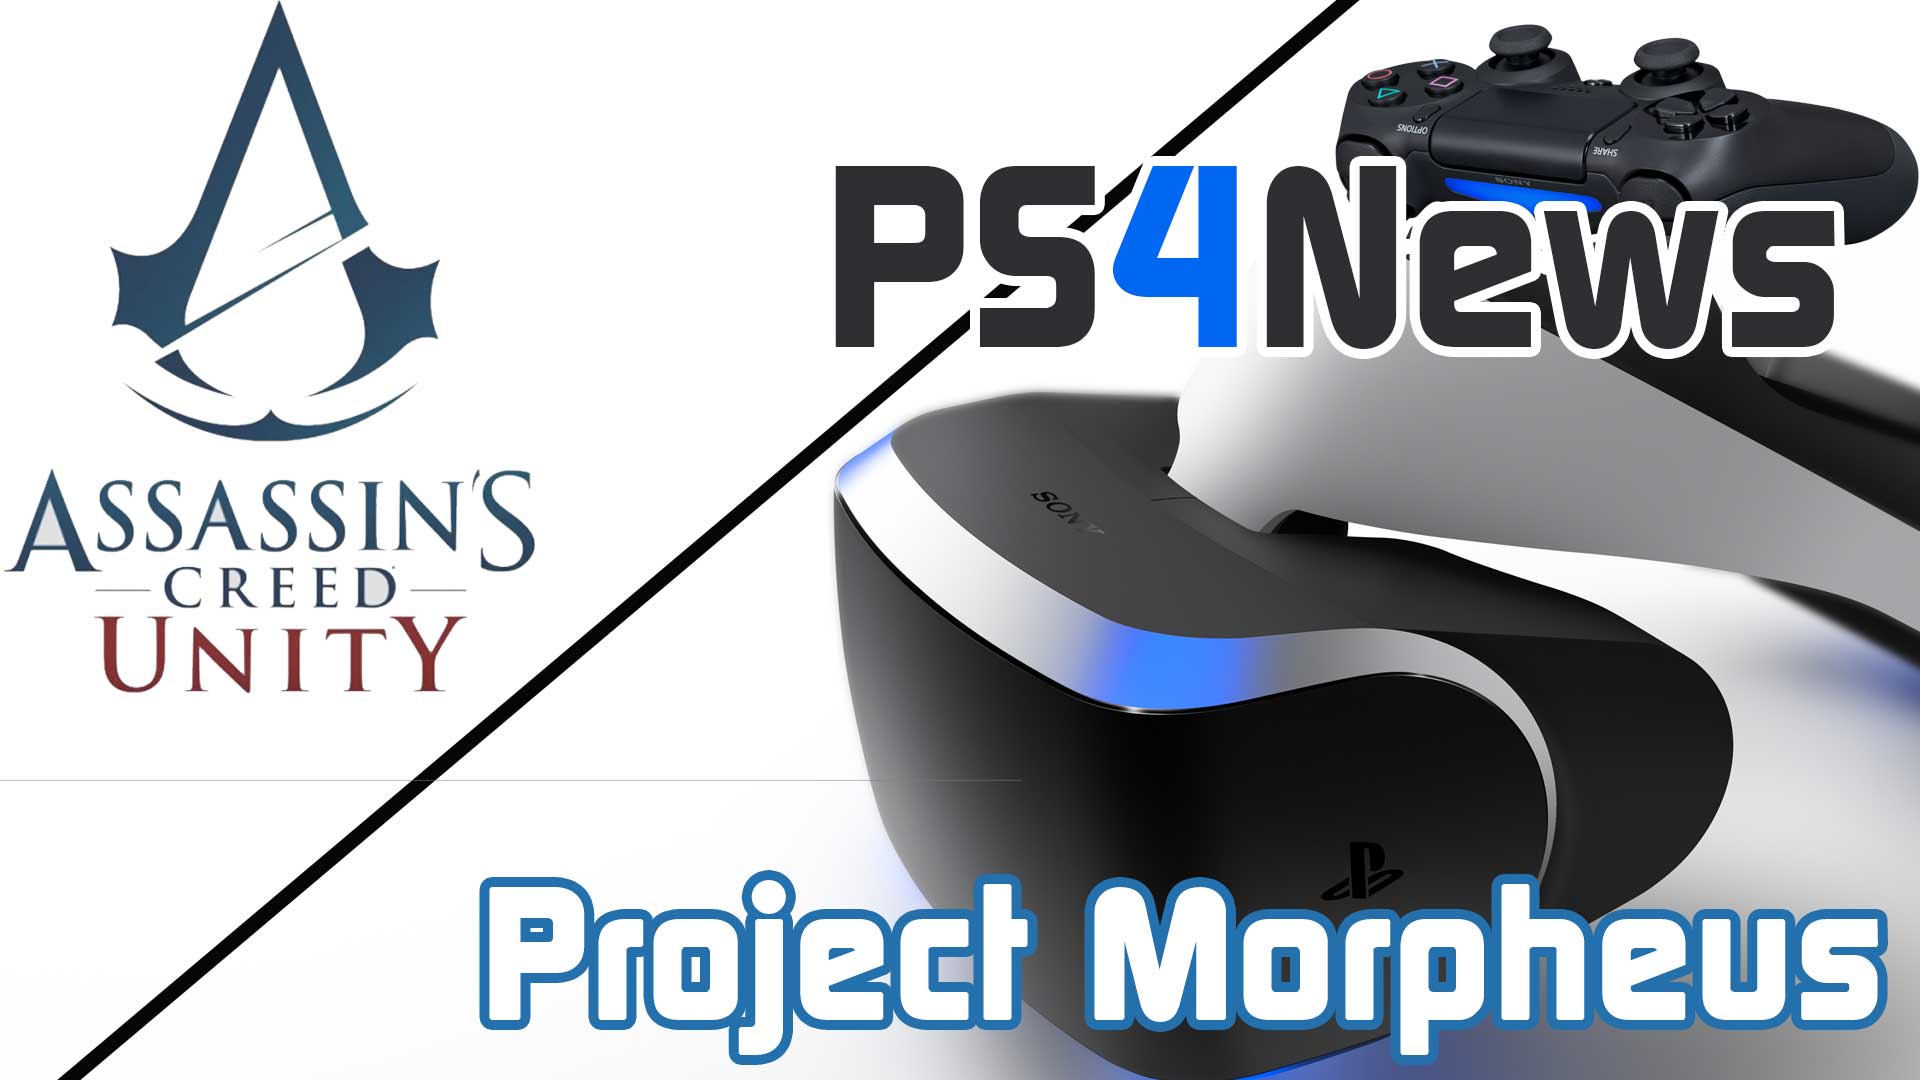 Project Morpheus Sony VR-Headset und Assassin’s Creed Unity